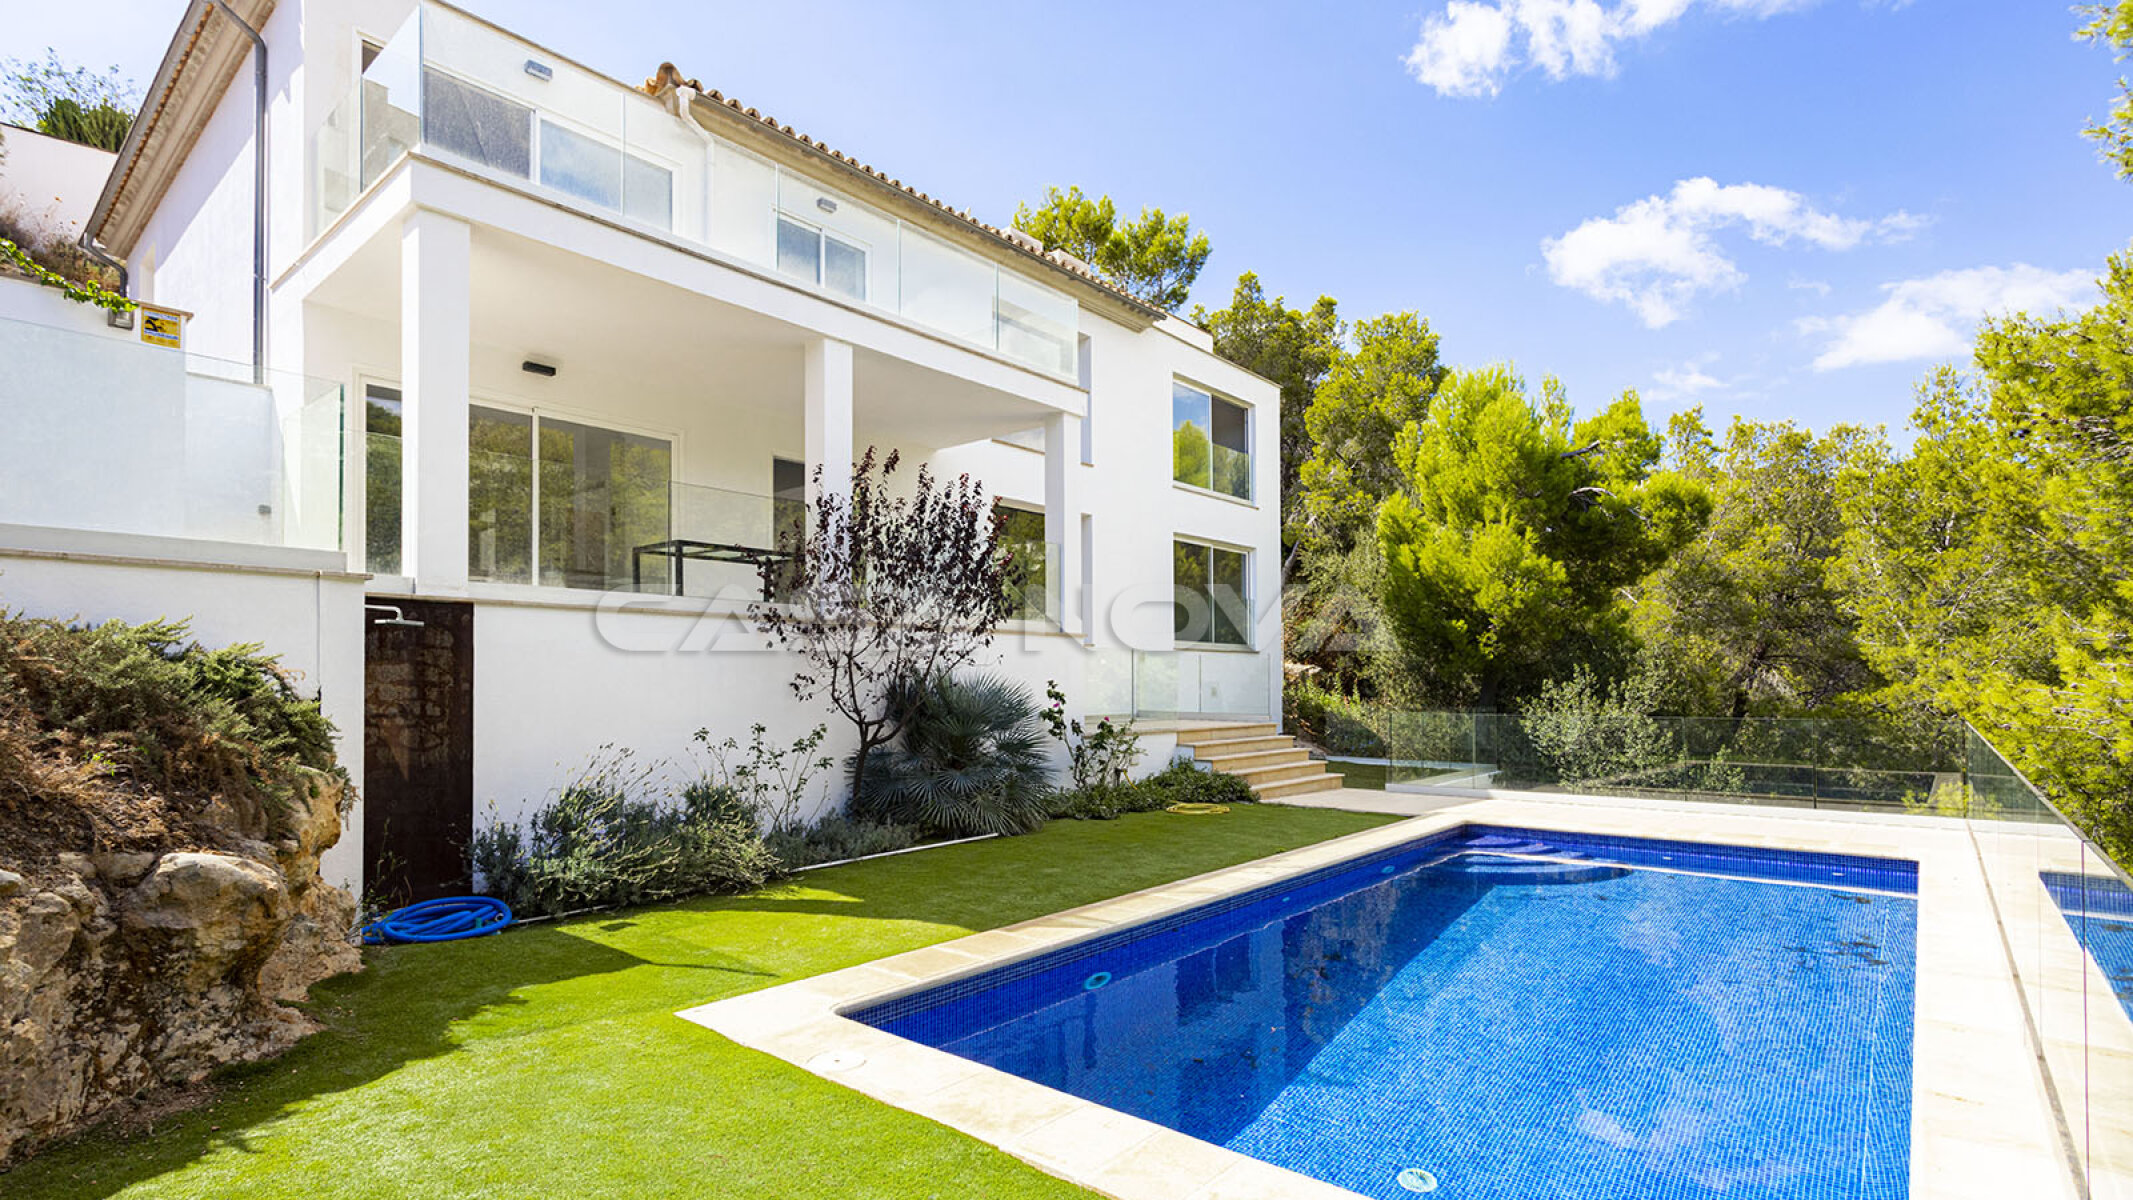 Mallorca real estate in the popular southwest of the island 